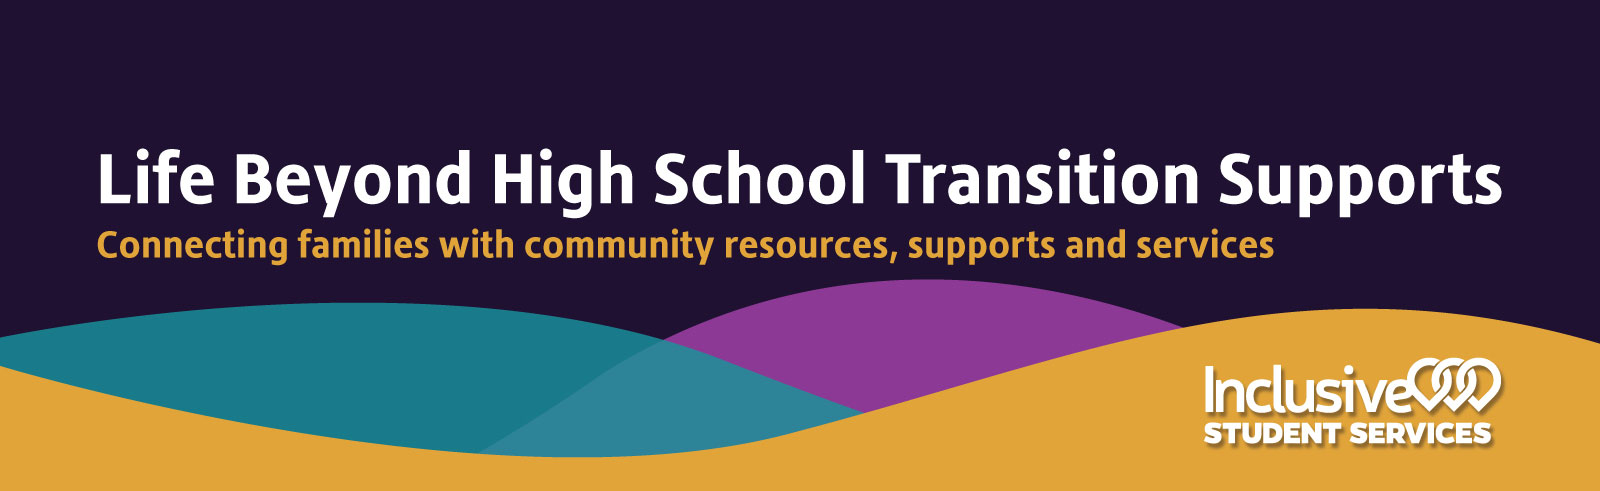 Life Beyond High School Transition Supports:  Connecting Families with Community Resources, Supports & Services